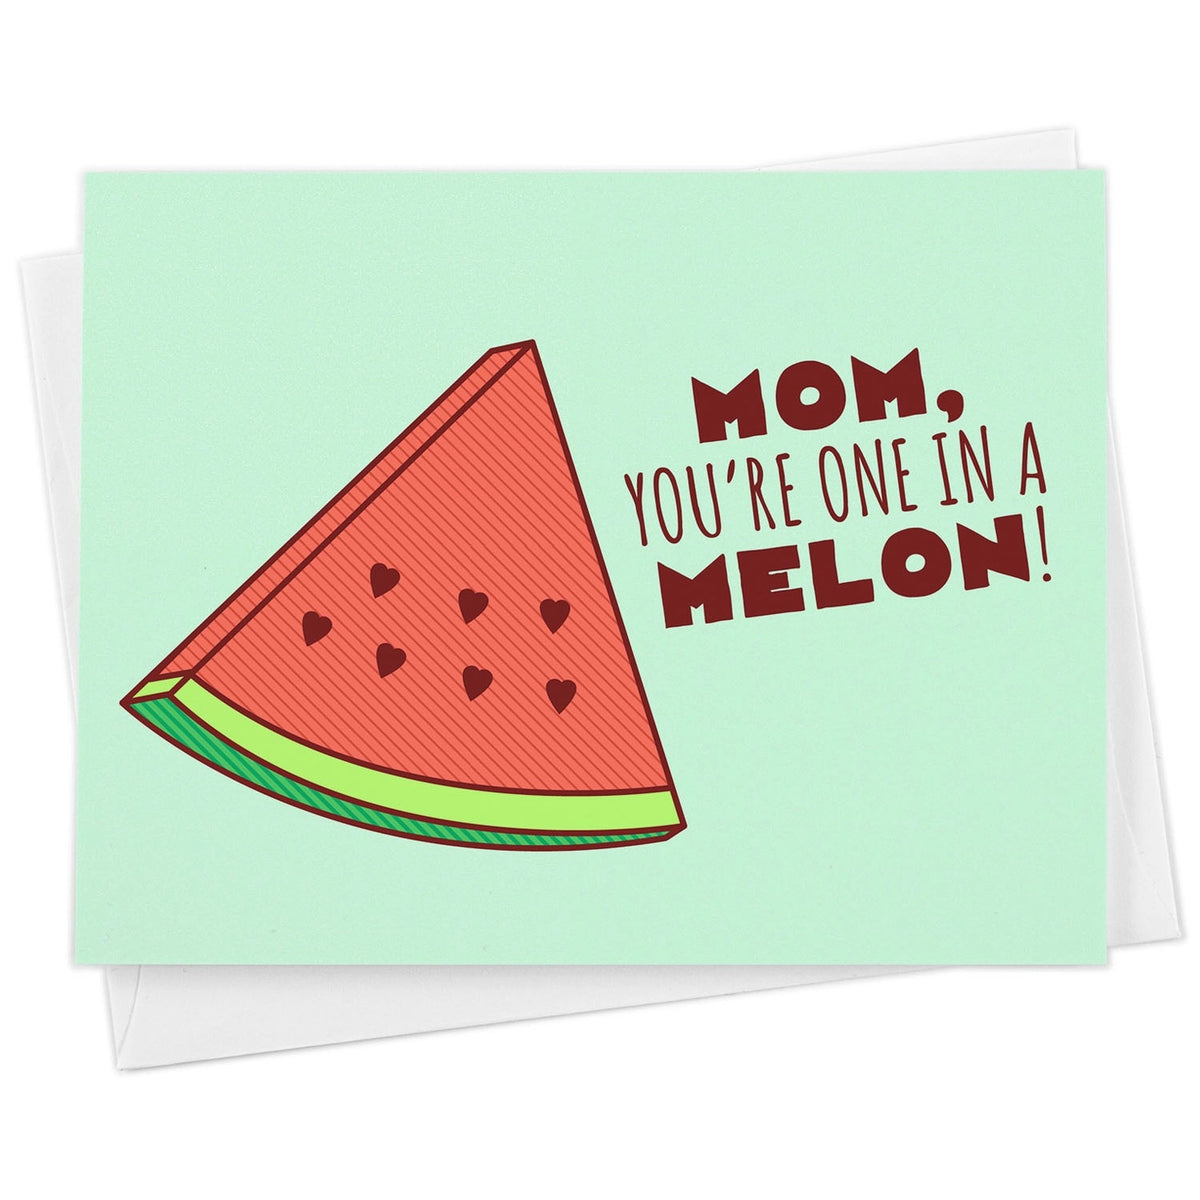 Mom, You're One in a Melon - Round Bamboo Cutting Board